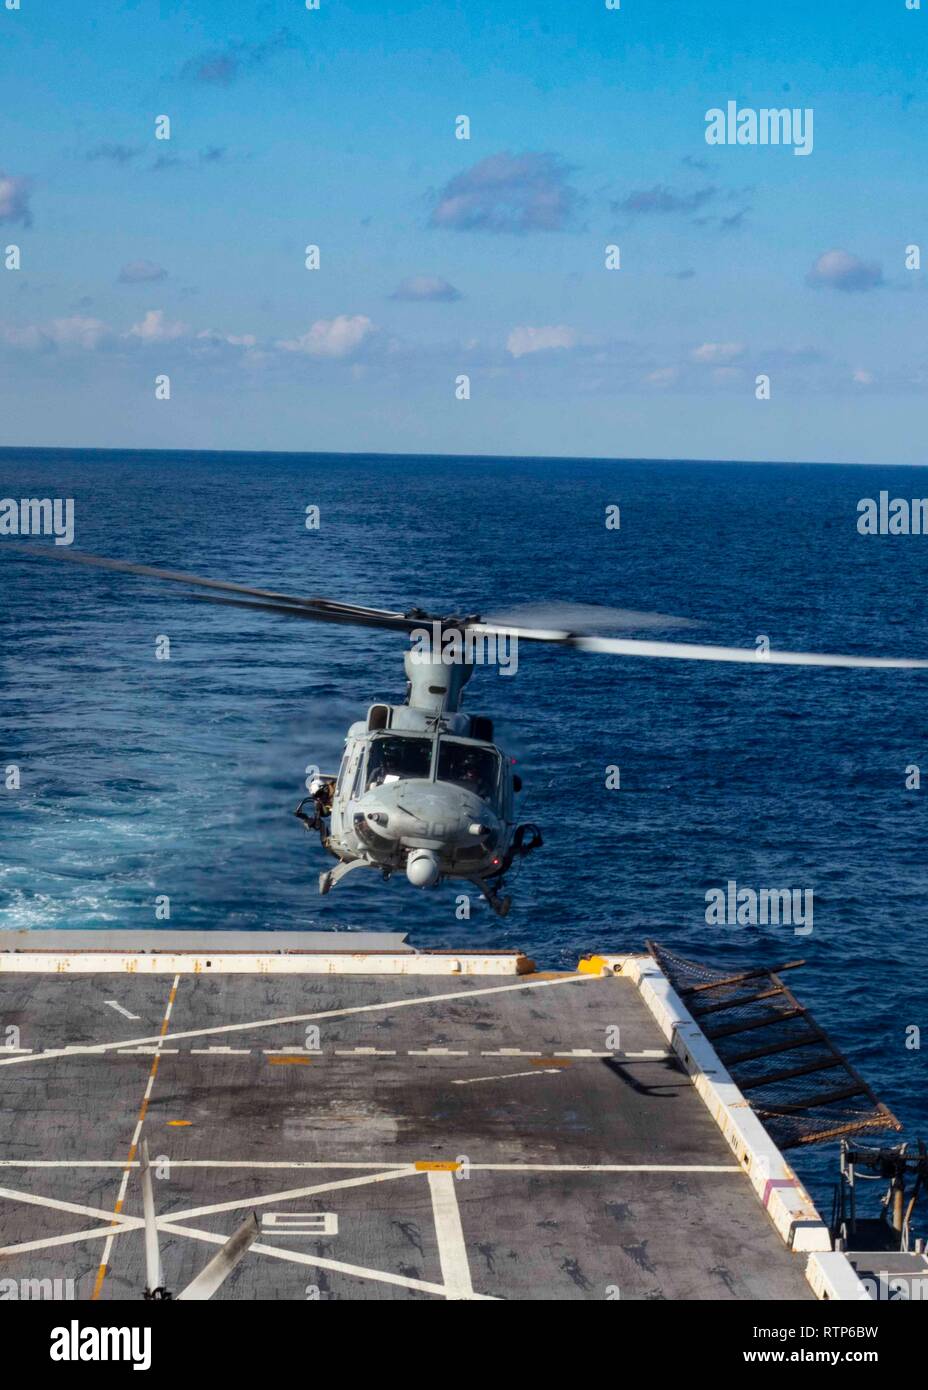 190226-N-HG389-0079 MEDITERRANEAN SEA (Feb. 26, 2019) A UH-1Y Huey helicopter assigned to the “Black Knights” of Marine Medium Tiltrotor Squadron (VMM) 264 (Reinforced) lands on the flight deck of the San Antonio-class amphibious transport dock ship USS Arlington (LPD 24), Feb. 26, 2019. Arlington is on a scheduled deployment as part of the Kearsarge Amphibious Ready Group in support of maritime security operations, crisis response and theater security cooperation, while also providing a forward naval presence. (U.S. Navy photo by Mass Communication Specialist 2nd Class Brandon Parker/Released Stock Photo